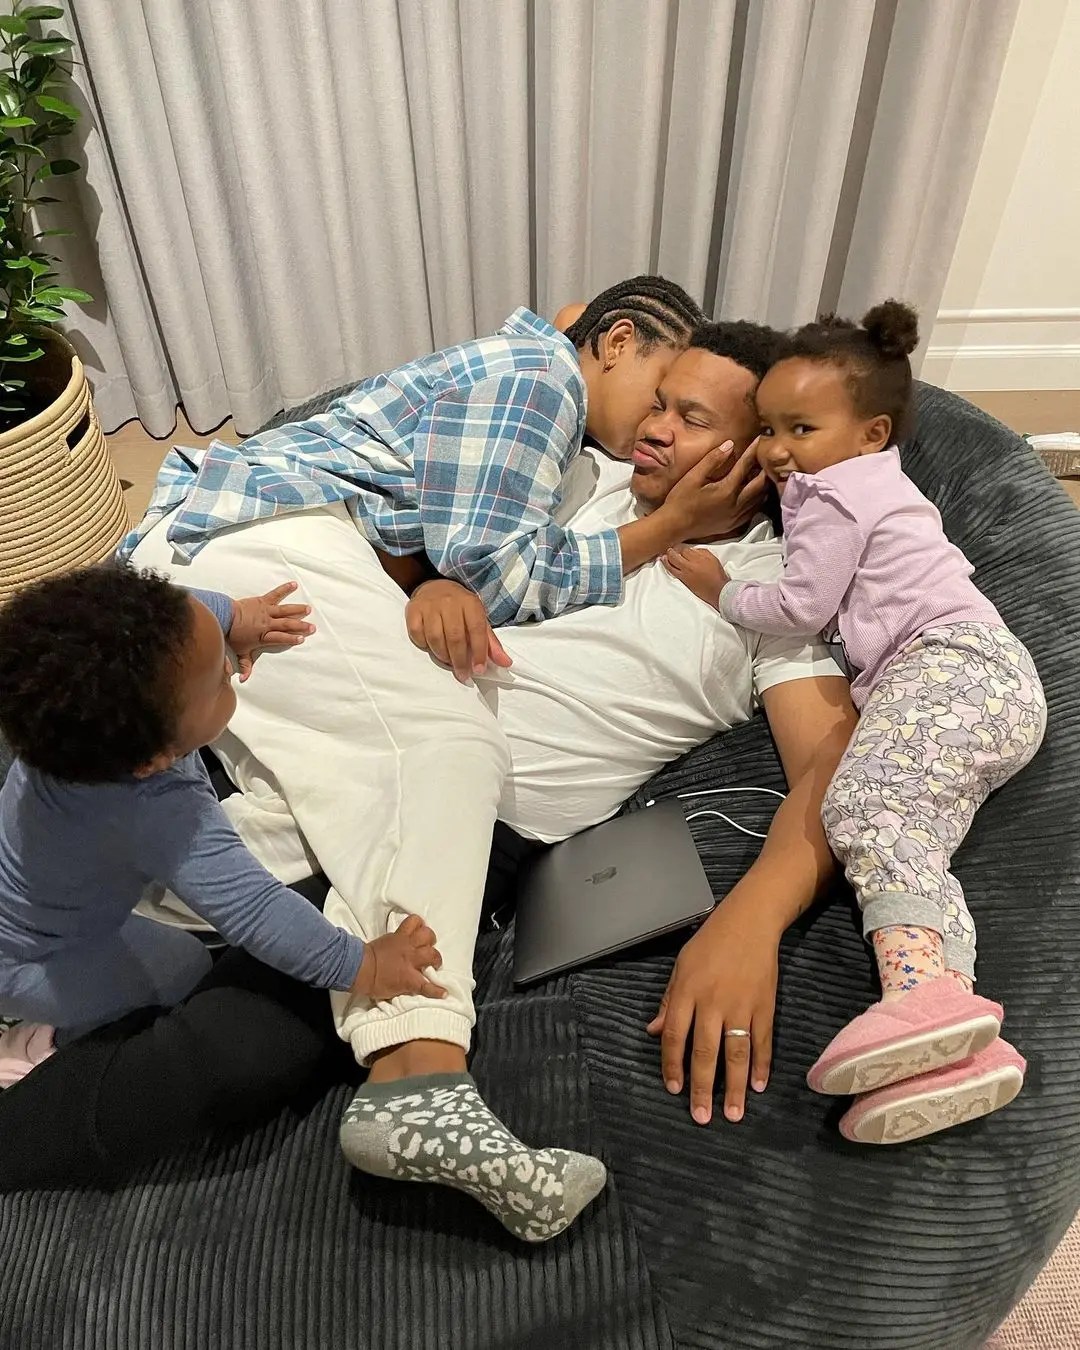 My kids are genuinely best friends and it warms my heart – Singer Brenden Praise